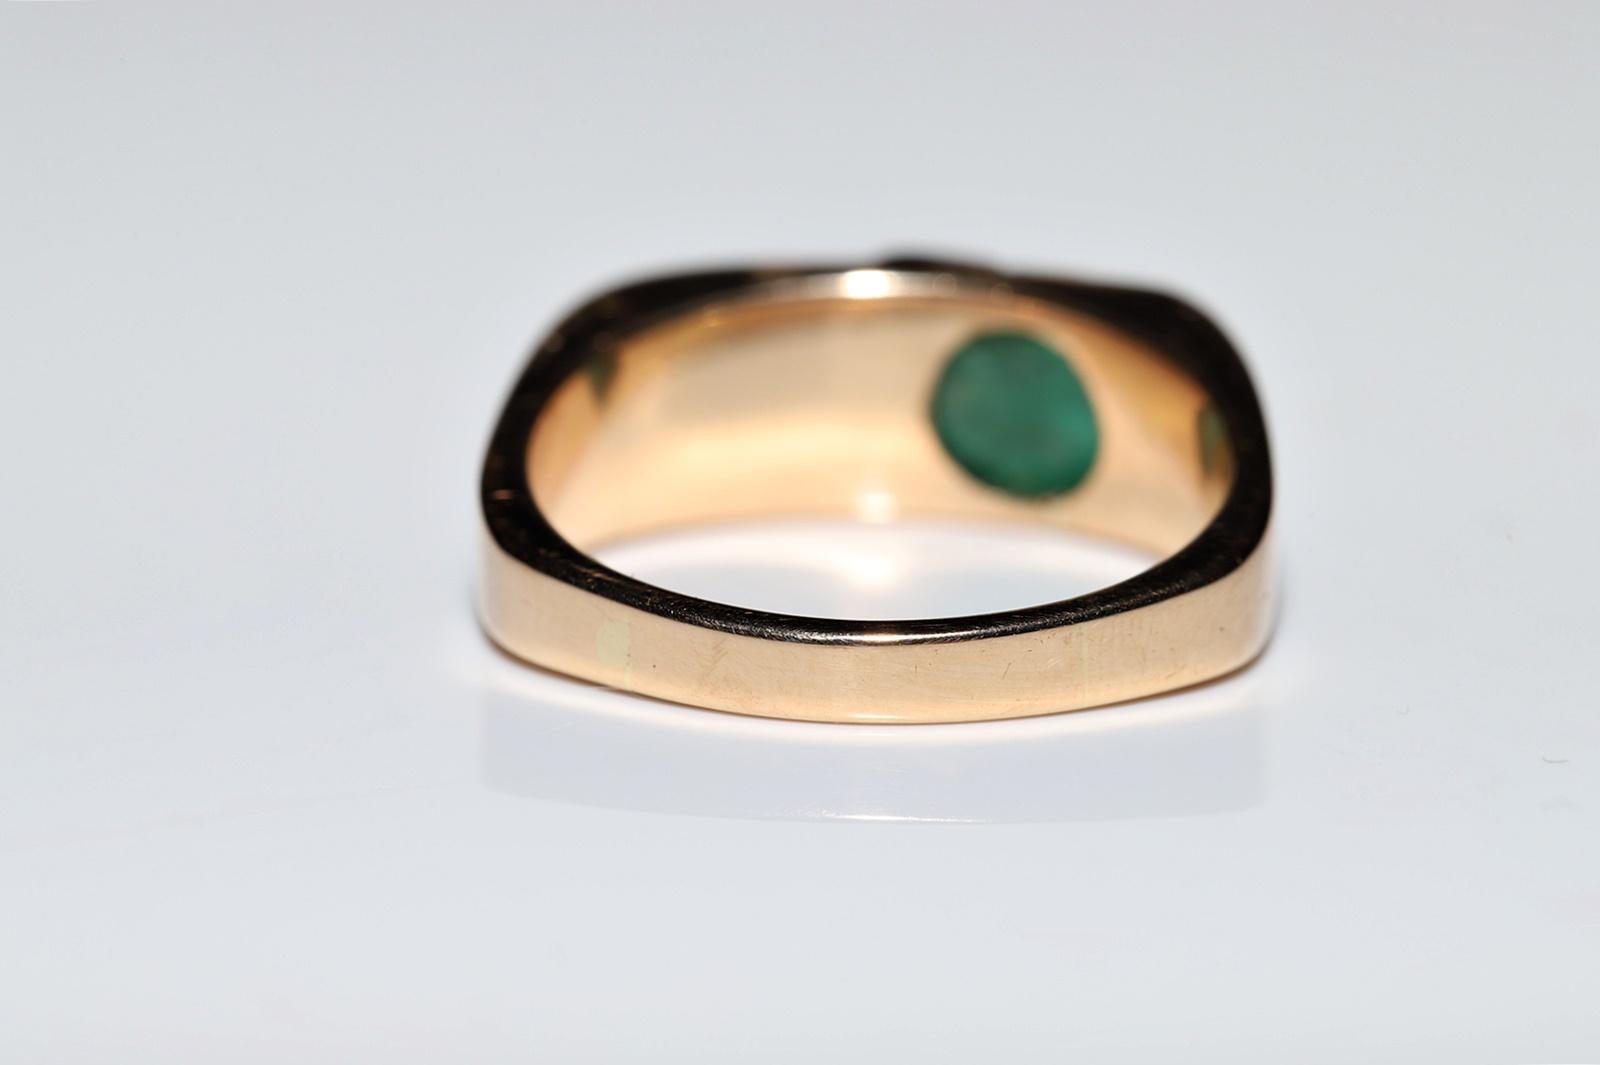 Antique Circa 1900s 18k Gold Natural Diamond And Cabochon Emerald Decorated Ring For Sale 4